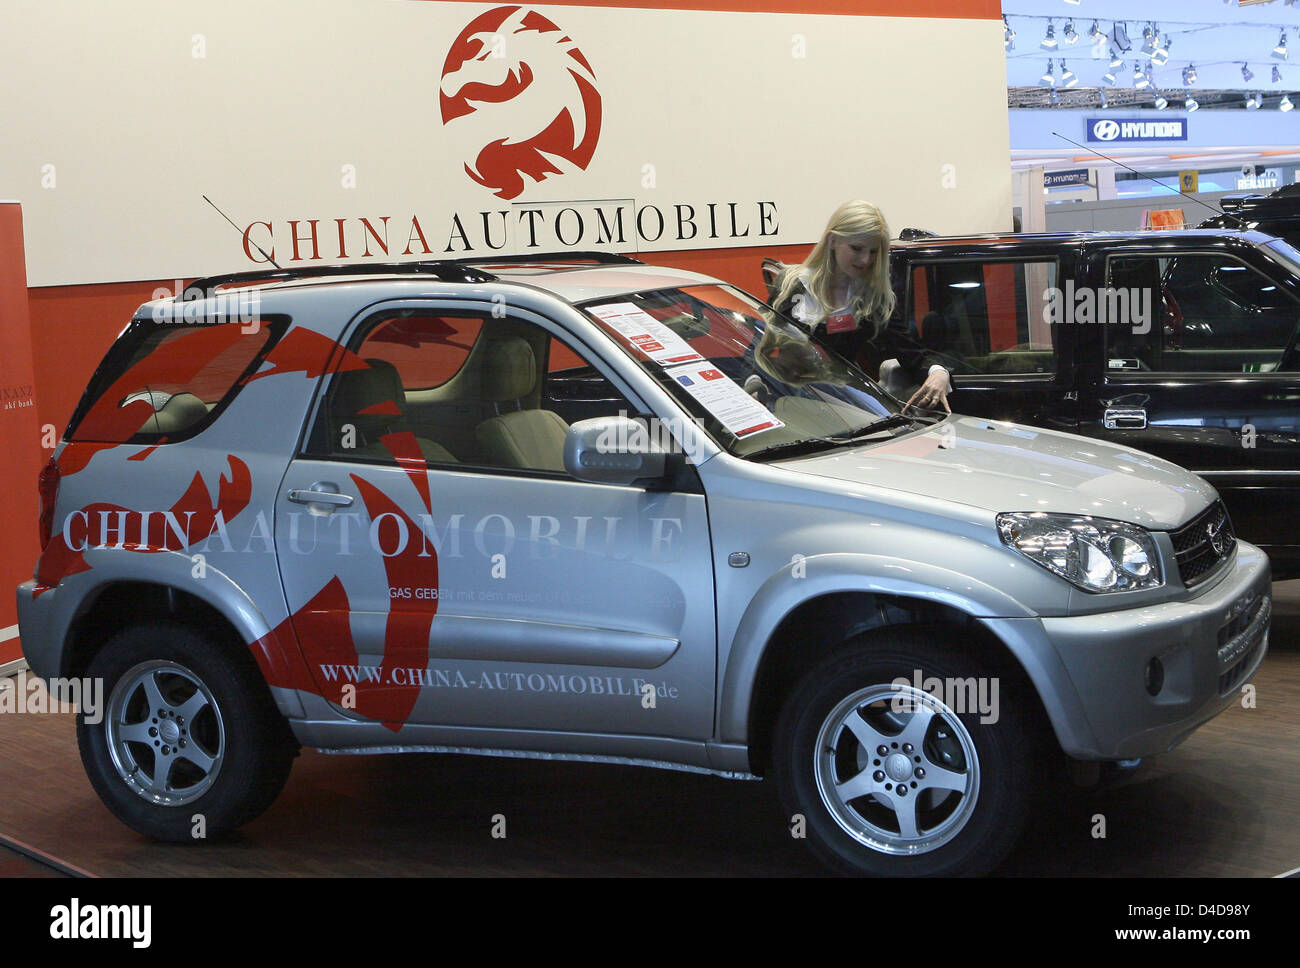 A Hostess Pictured With A Suv Of China Automobile At The Auto Mobil Stock Photo Alamy